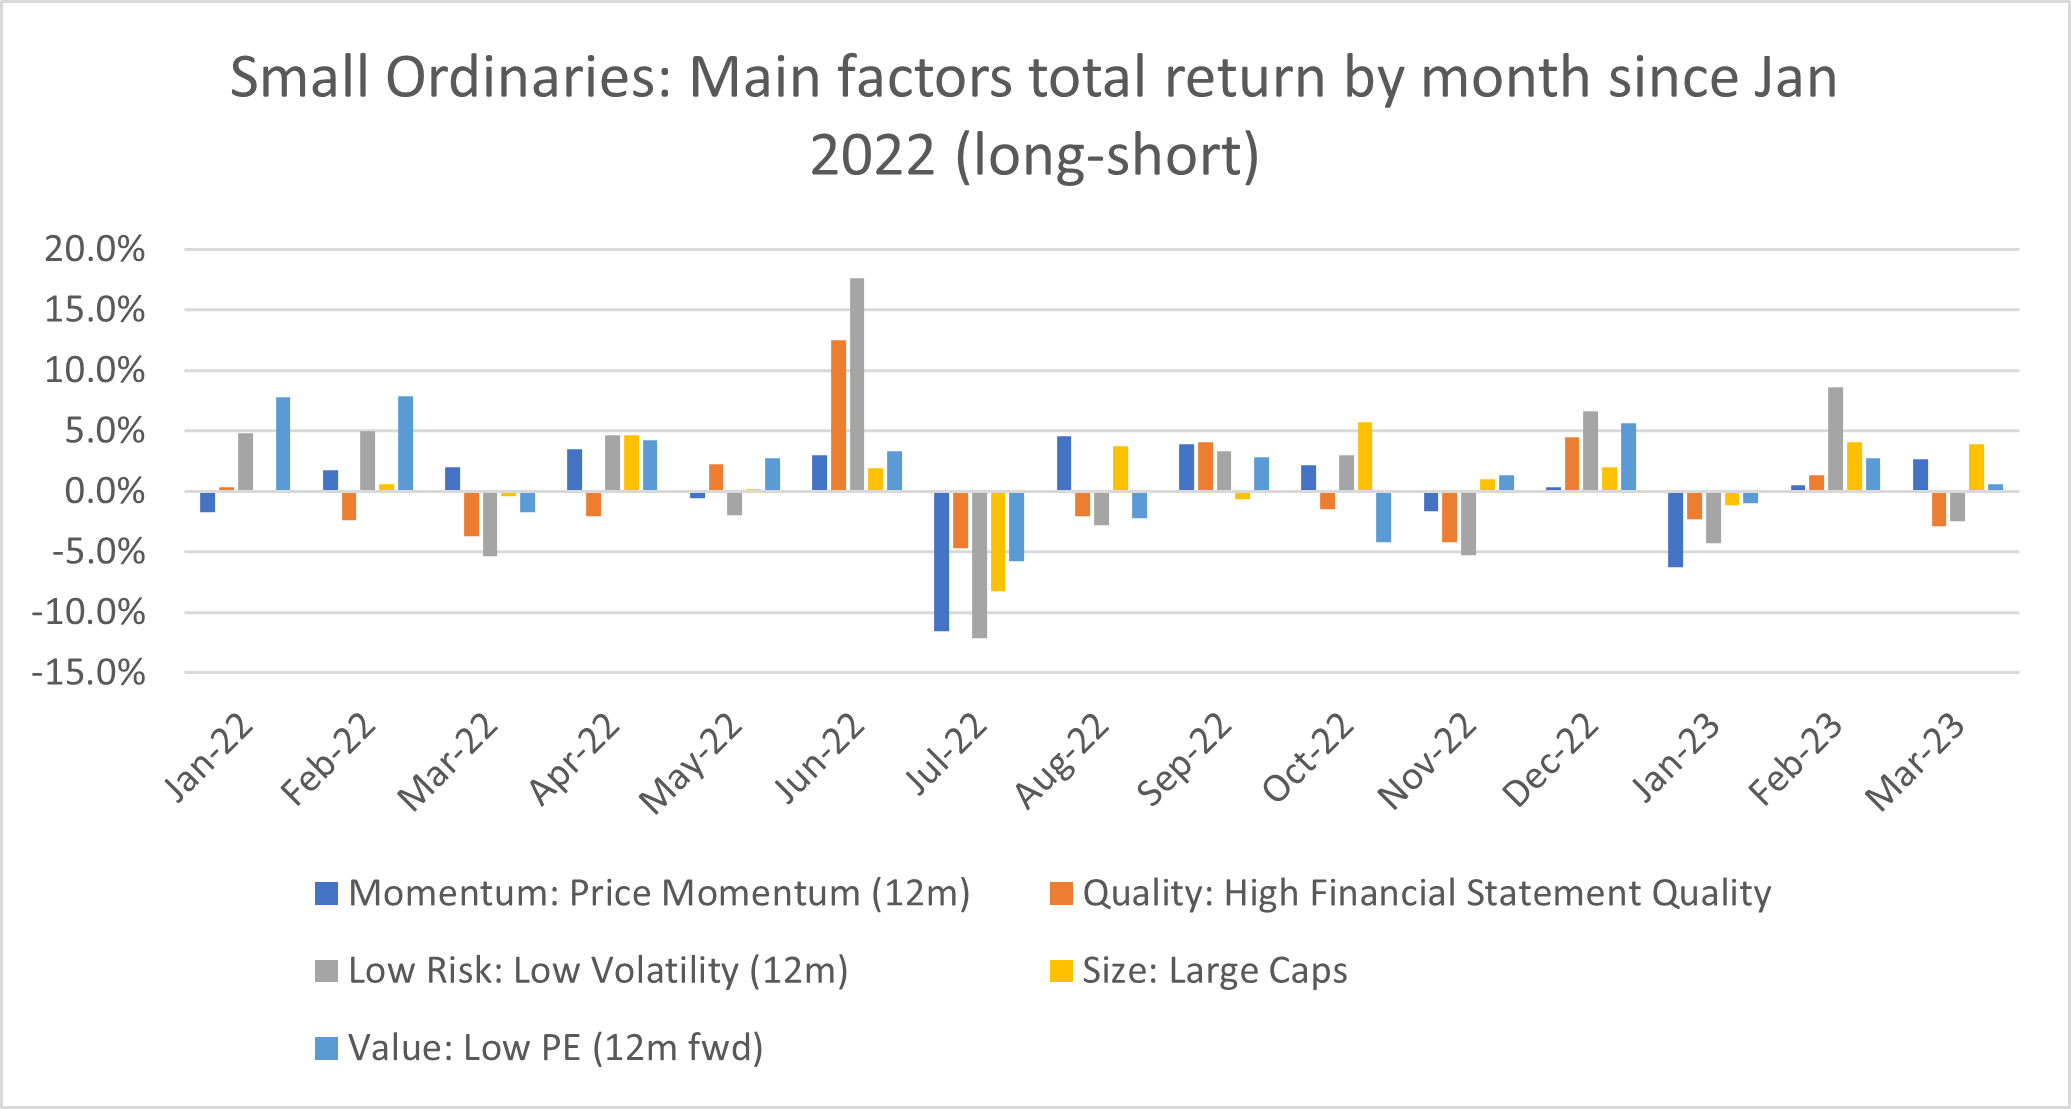 Small-Ordinaries-Main-factors-total-return-by-month-since-Jan-2022